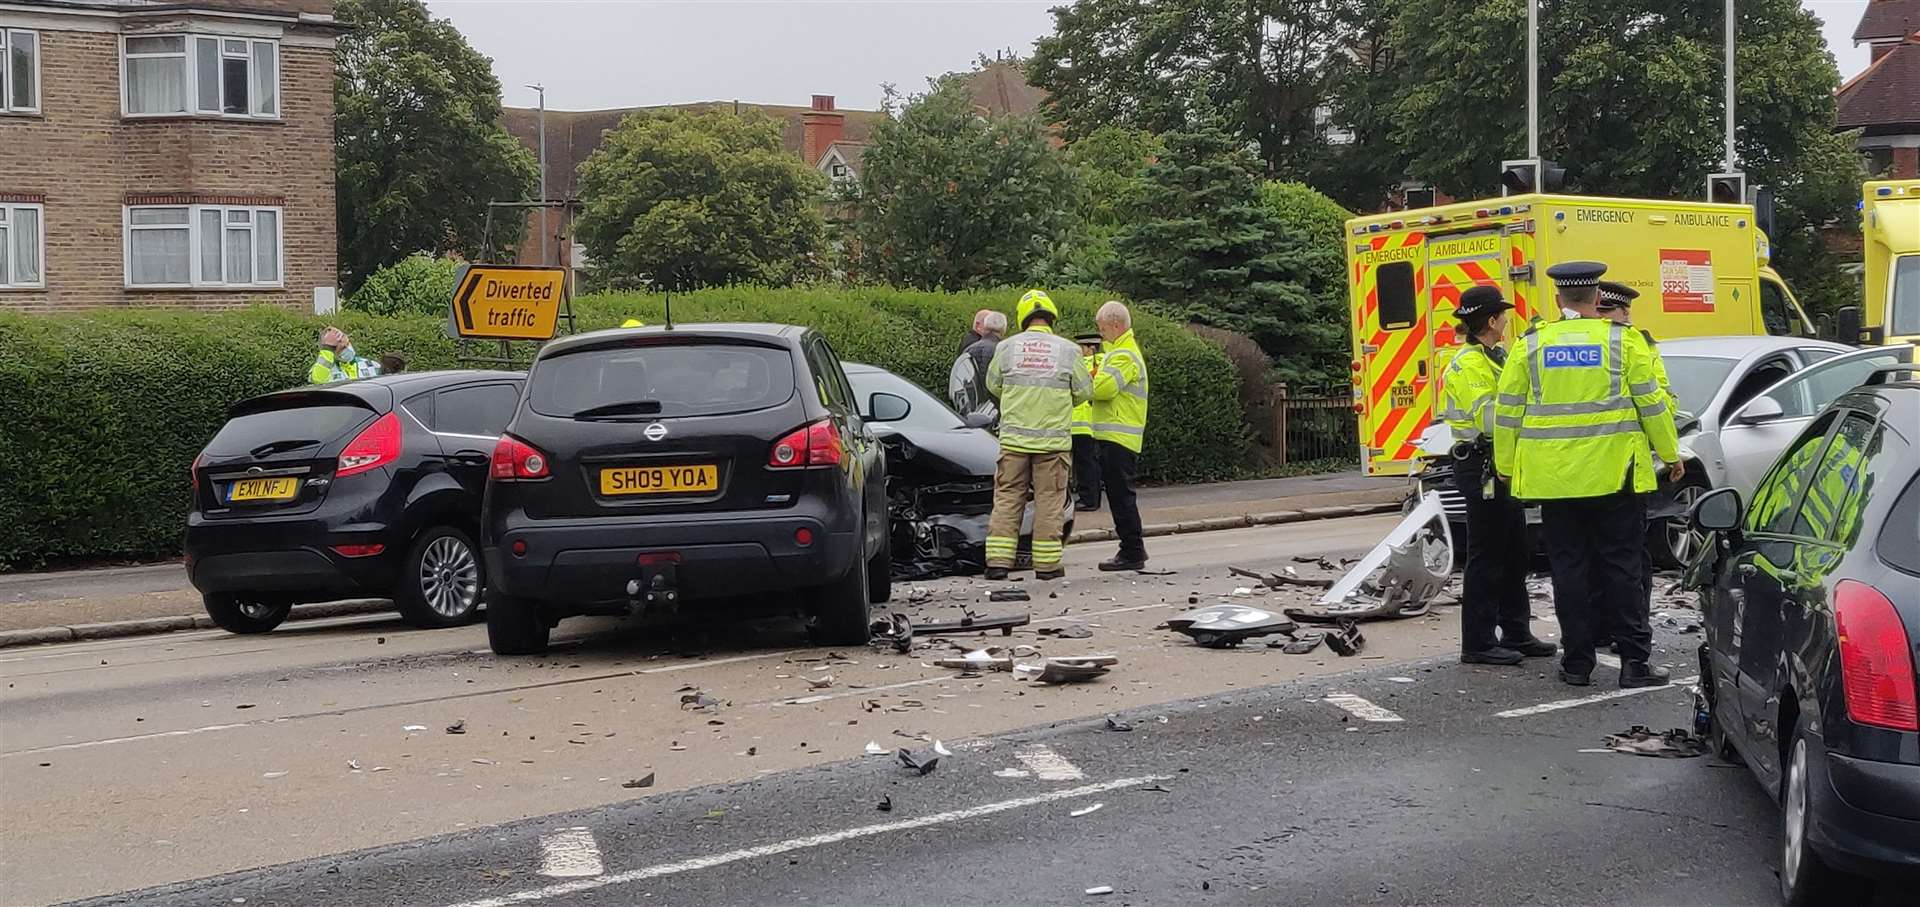 Five vehicles were involved in the crash